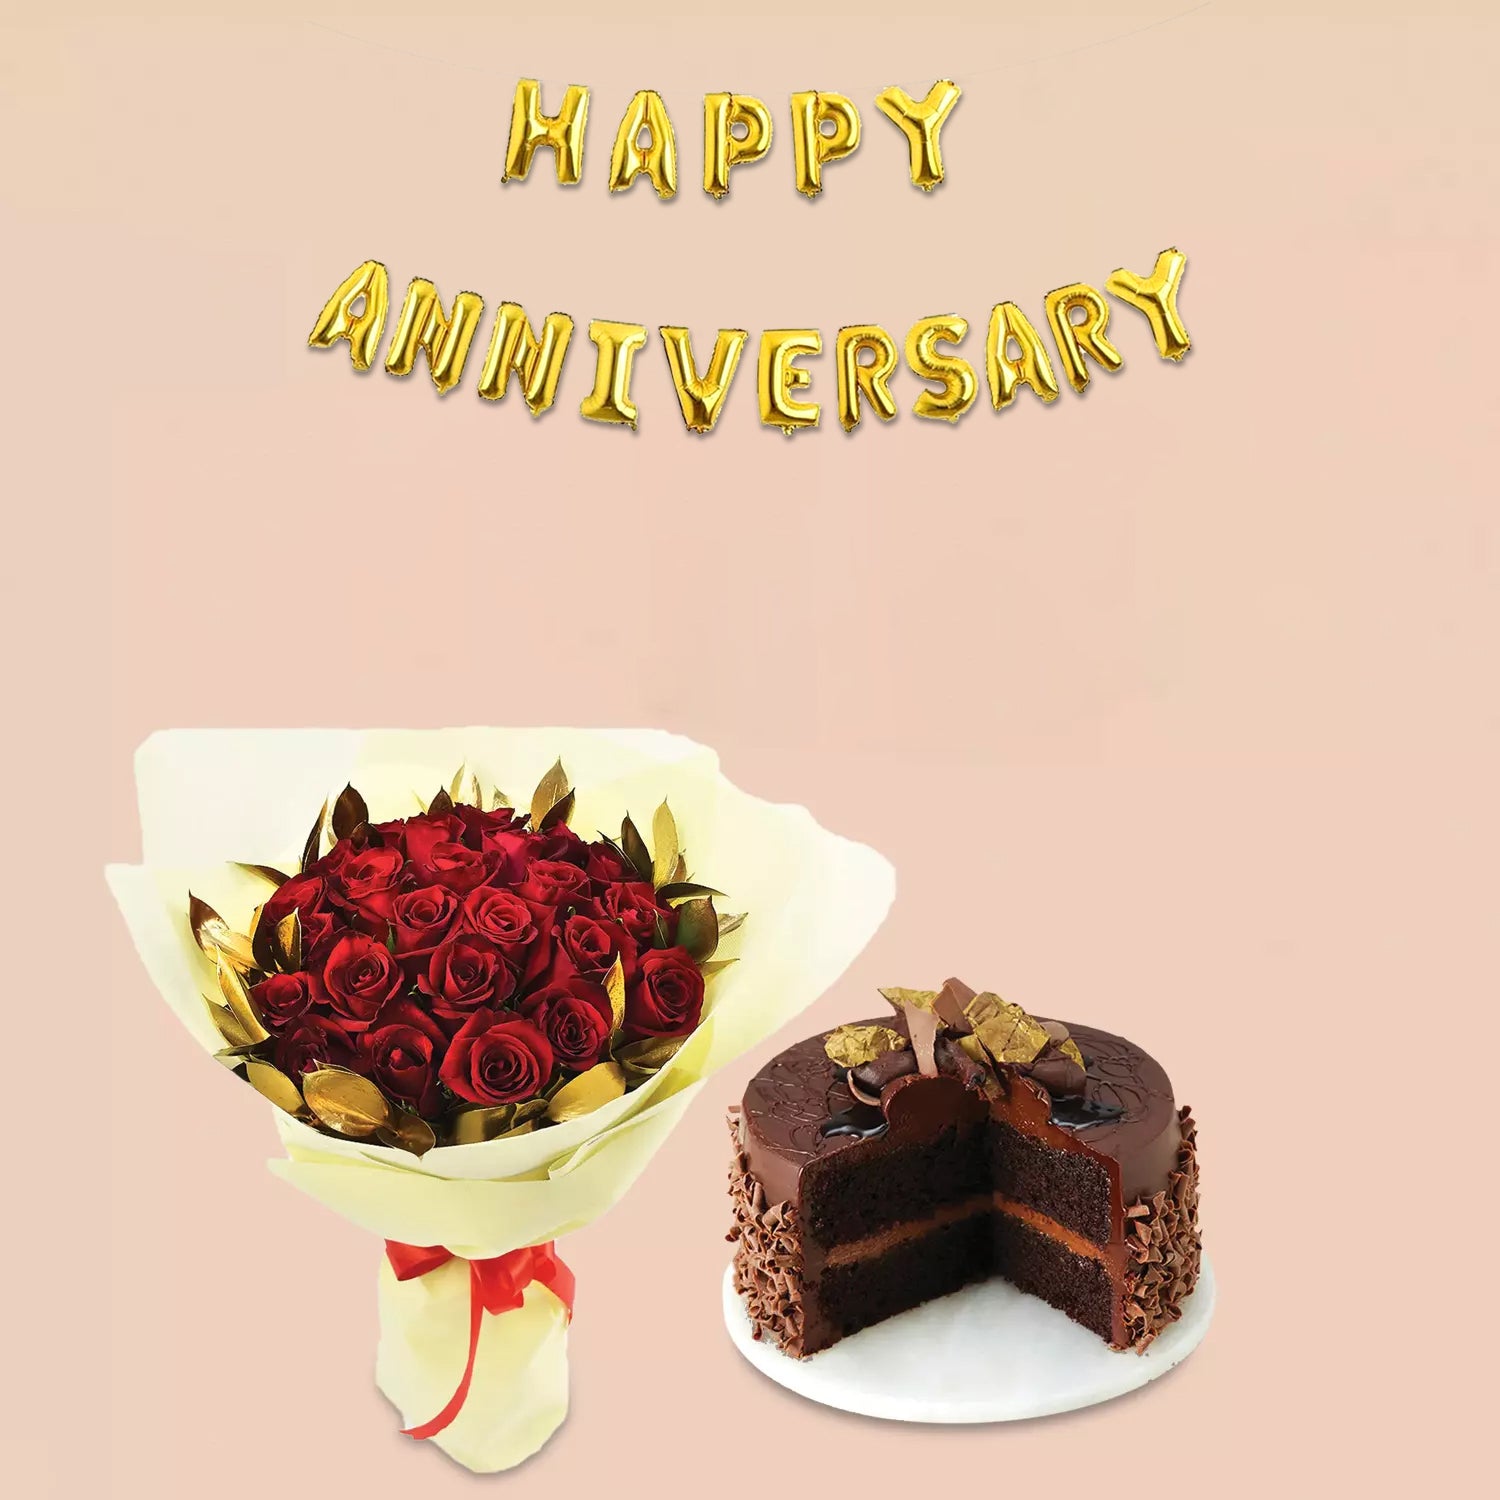 Marriage Anniversary Cute Cake Wishes Images For Wife | Best Wishes | Happy anniversary  cakes, Wedding anniversary wishes, Anniversary wishes for wife